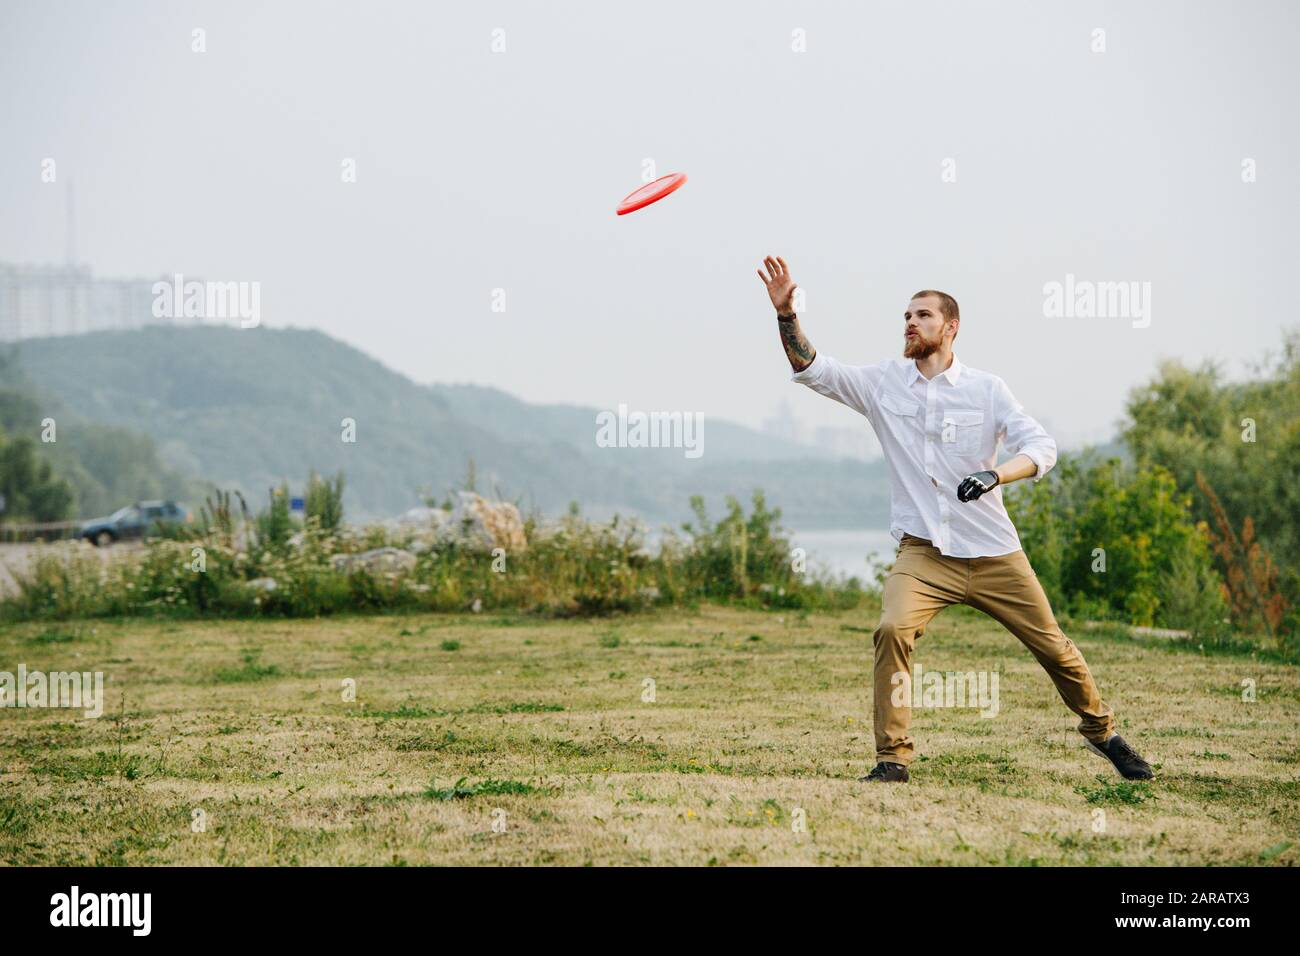 Man catching frisbee in a park next to a river and forest ridge Stock Photo